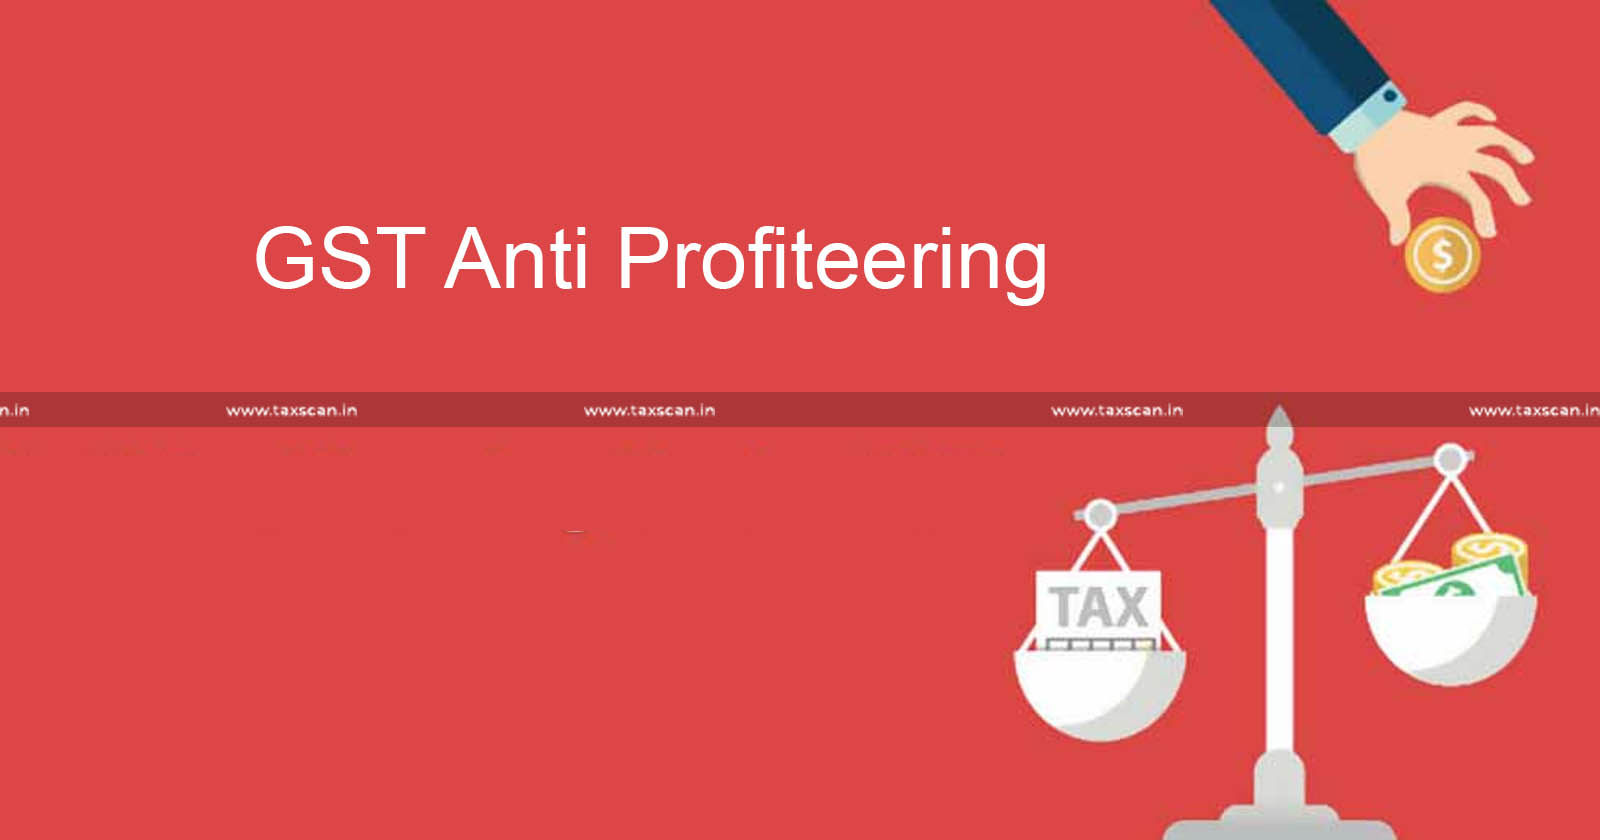 GST anti profiteering - GST - Delhi High Court - National Anti Profiteering Authority - Goods and Services laws - NAA - TAXSCAN